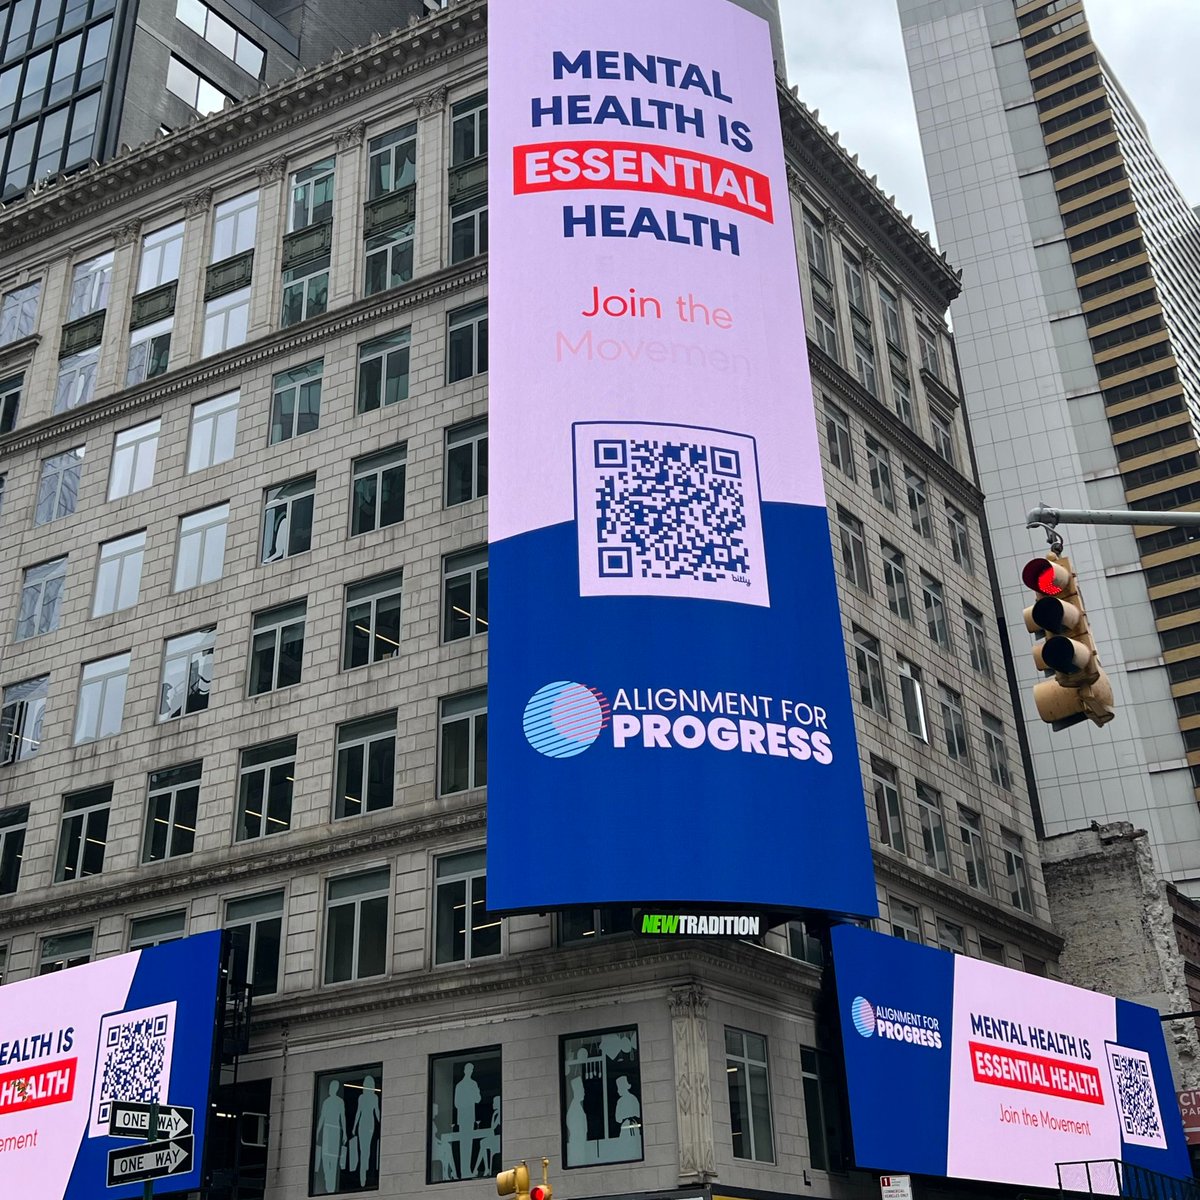 We joined @kennedyforum for a Mental Health Awareness Month moment in New York City! On the Times Square billboards, they're reminding people that mental health is essential health and celebrating the release of @PJK4brainhealth's new book, Profiles in Mental Health Courage.